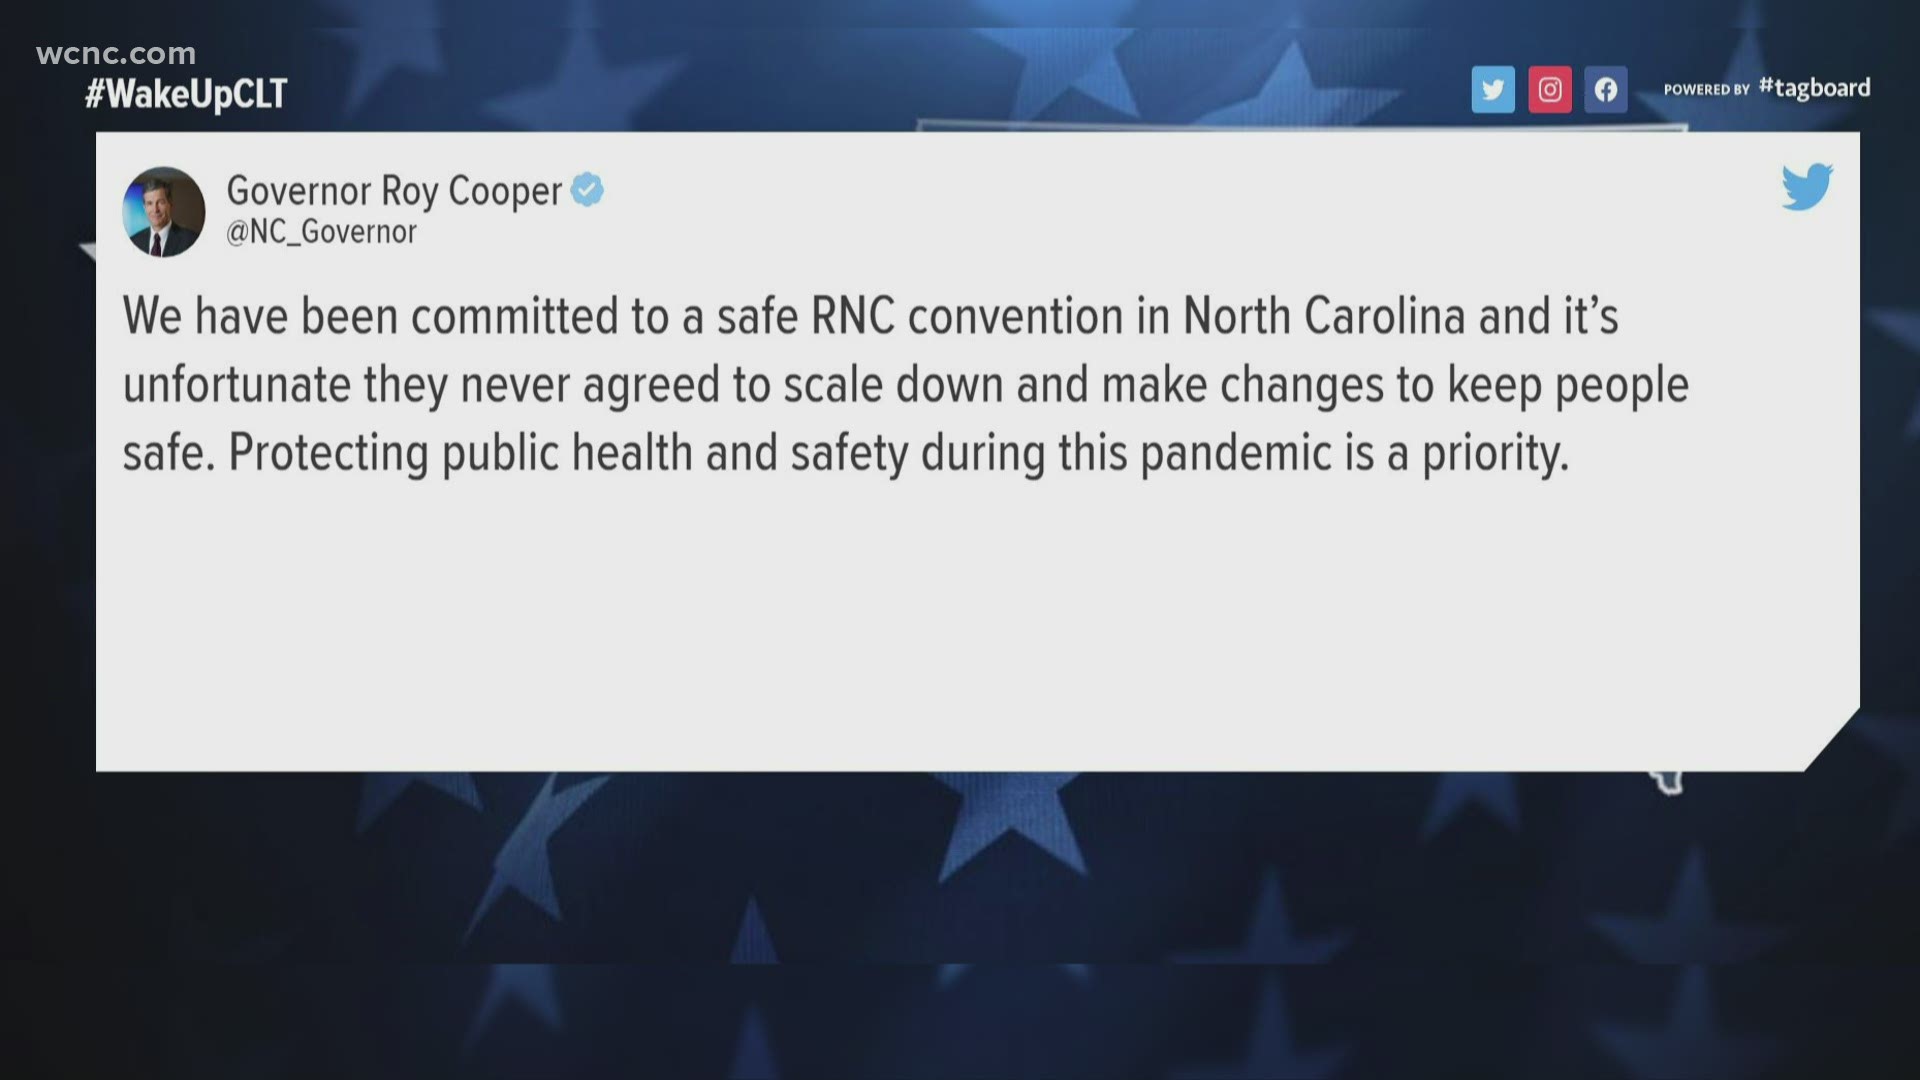 President Donald Trump tweeted Tuesday that he has no choice but to pull the RNC from Charlotte after Governor Roy Cooper's letter to GOP leaders.